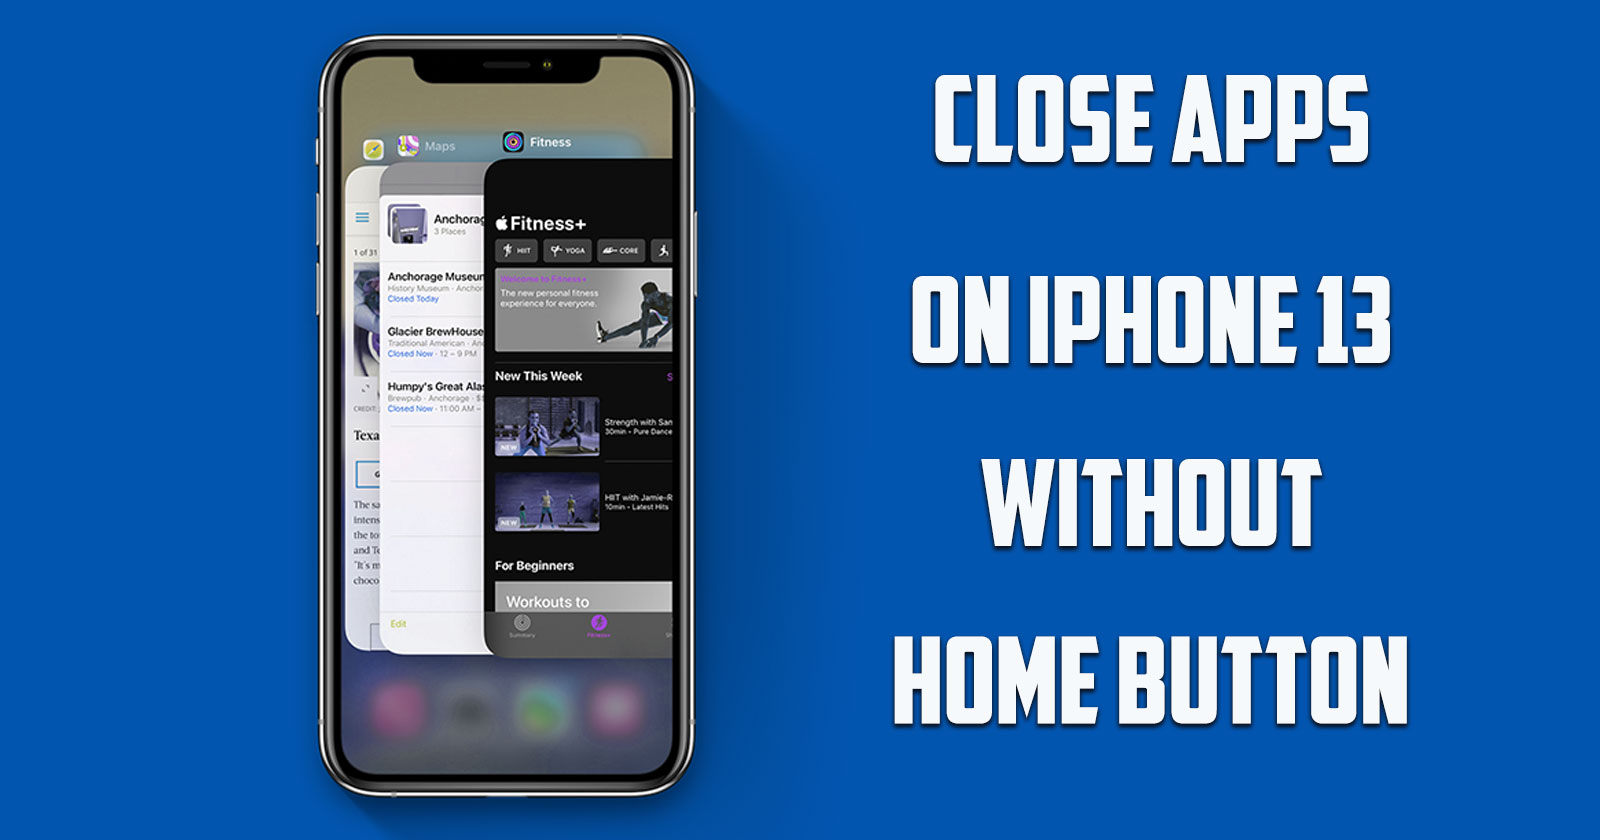 How to Close Apps on iPhone 13 without Home Button